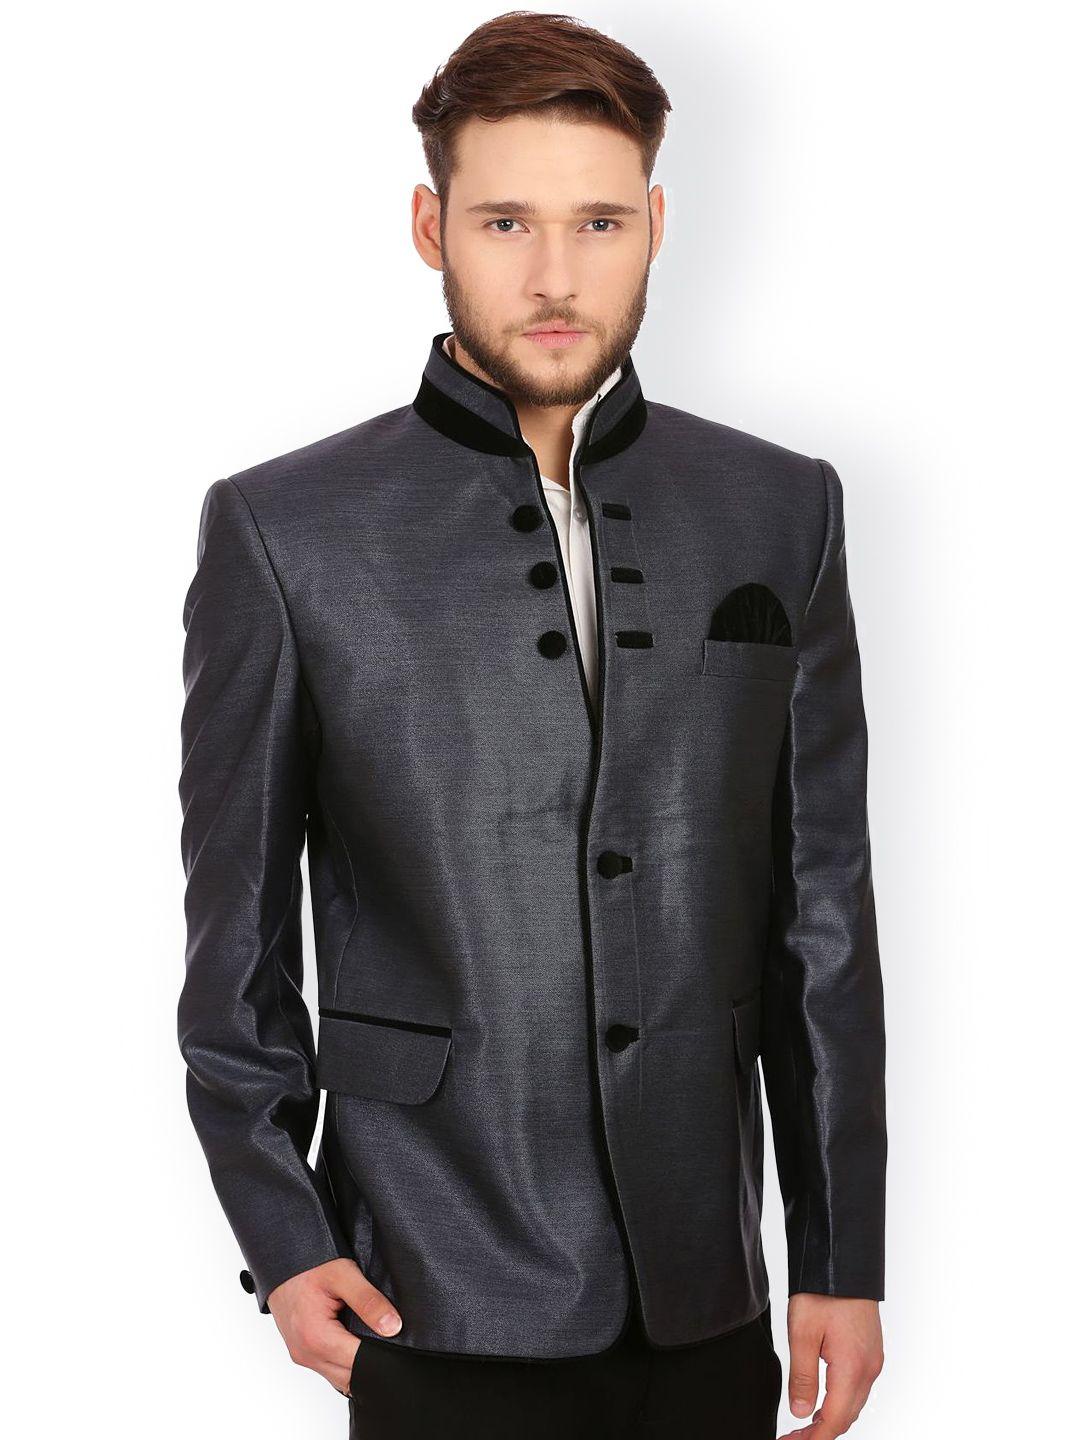 wintage-men-grey-single-breasted-tailored-fit-ethnic-bandhgala-blazer